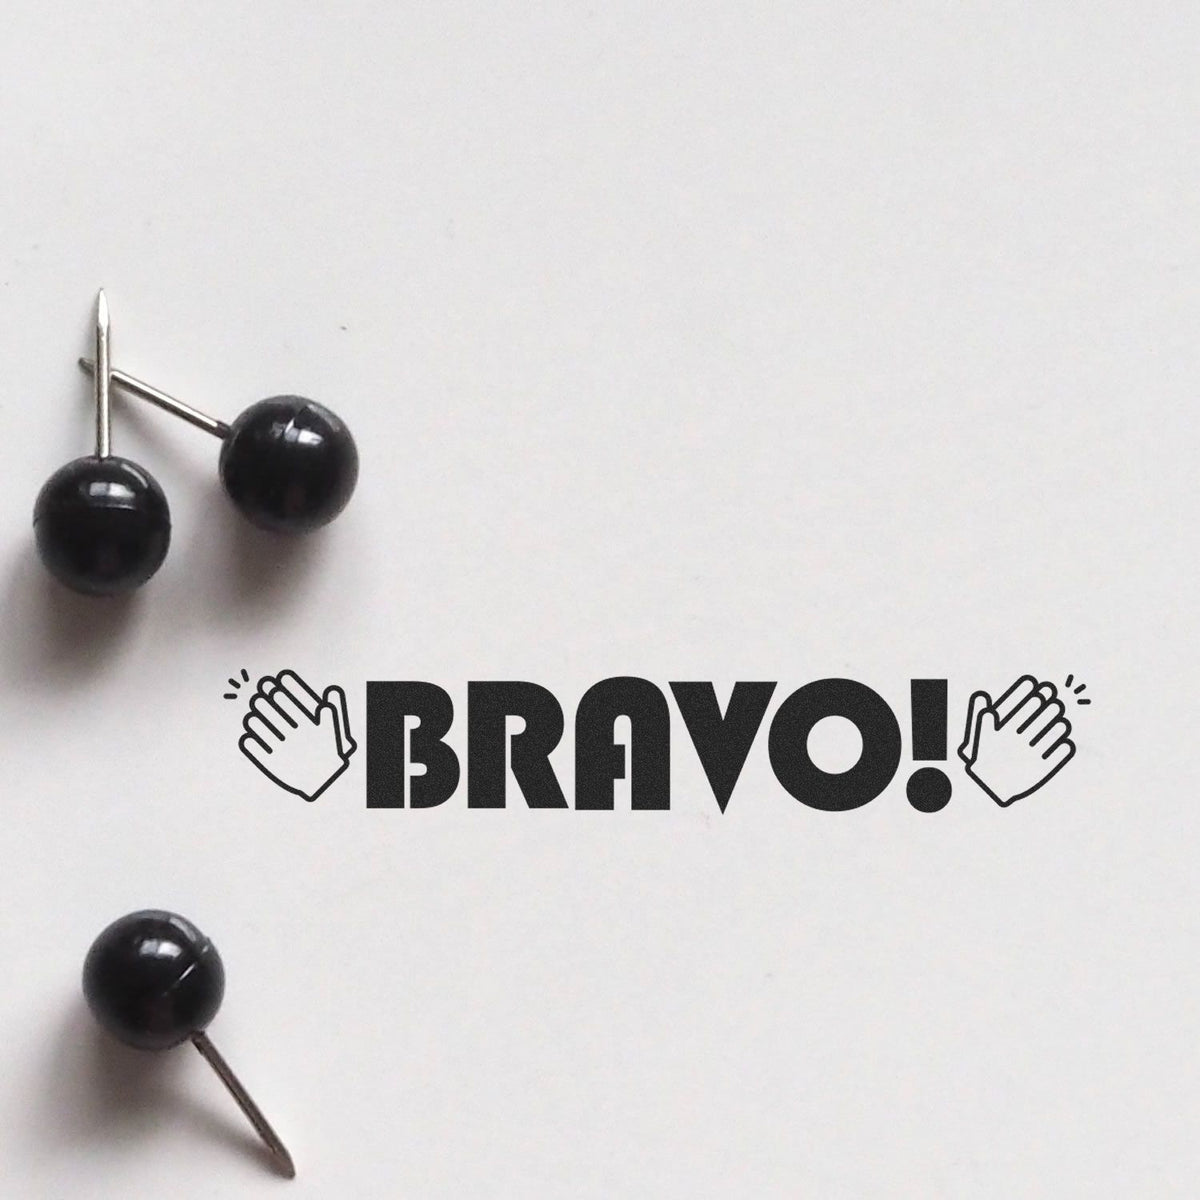 Bravo with Hands Rubber Stamp Lifestyle Photo